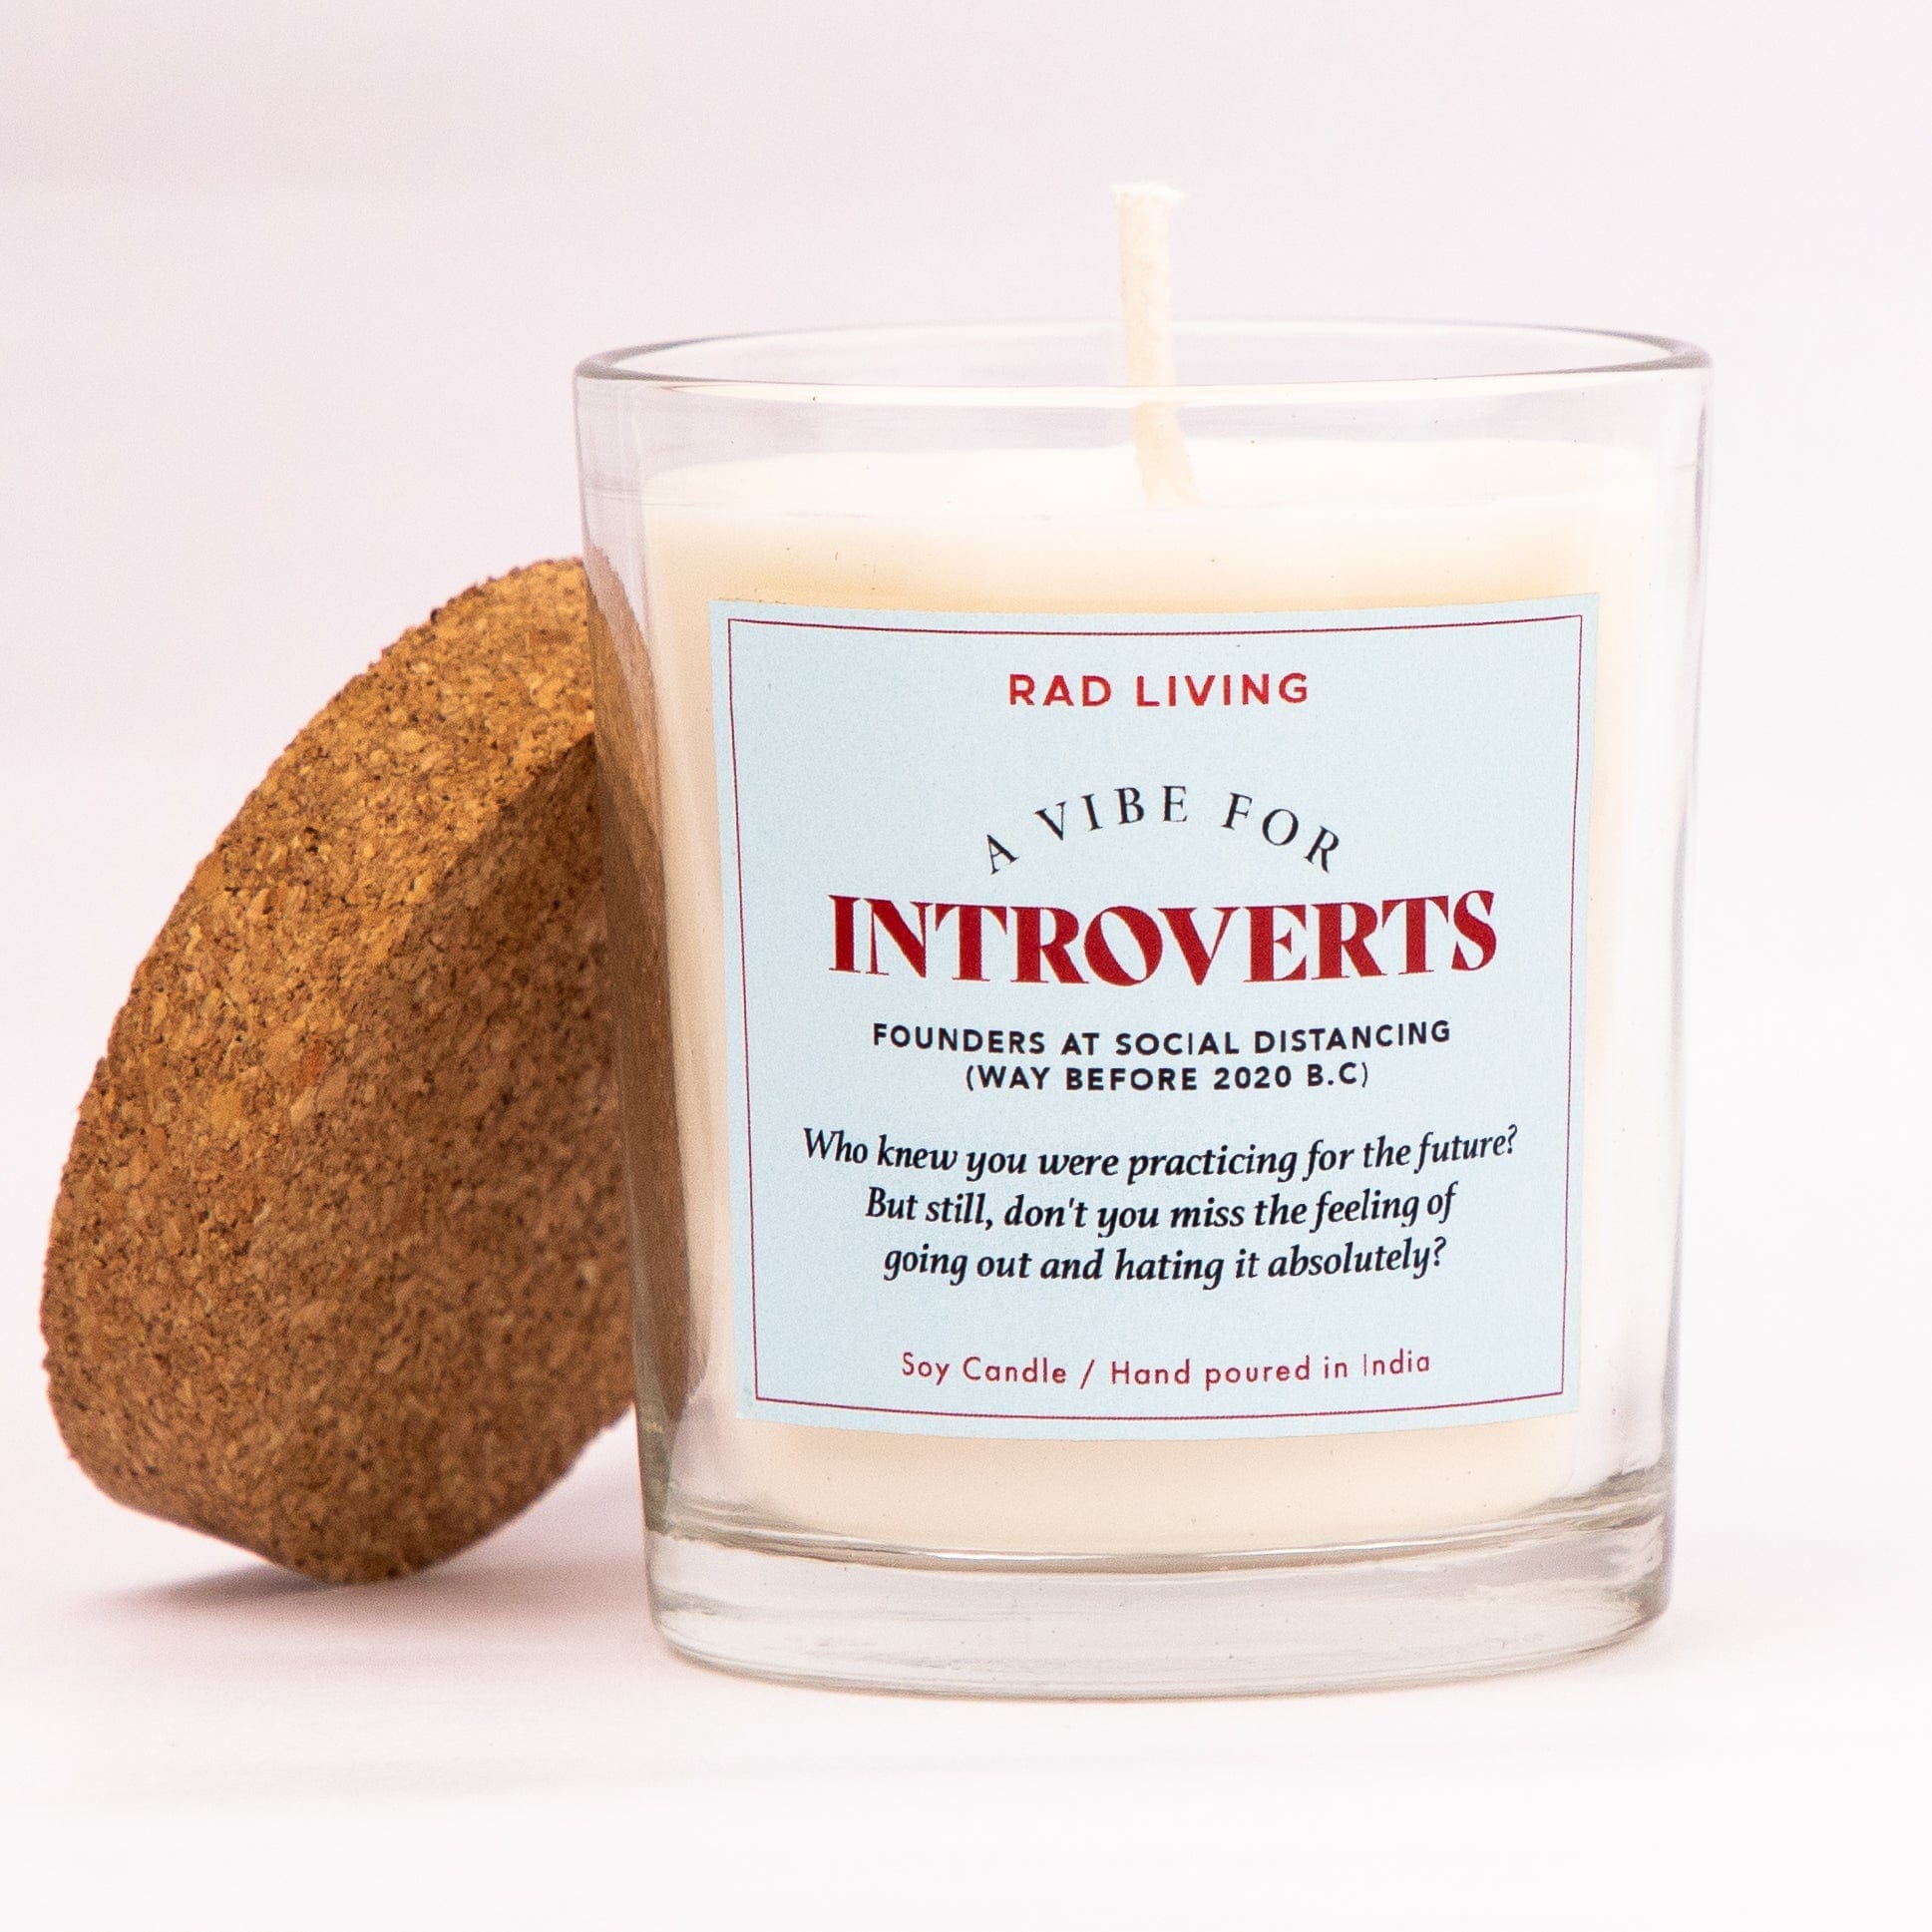 Introverts - Cinnamon Mocha Scented Candle